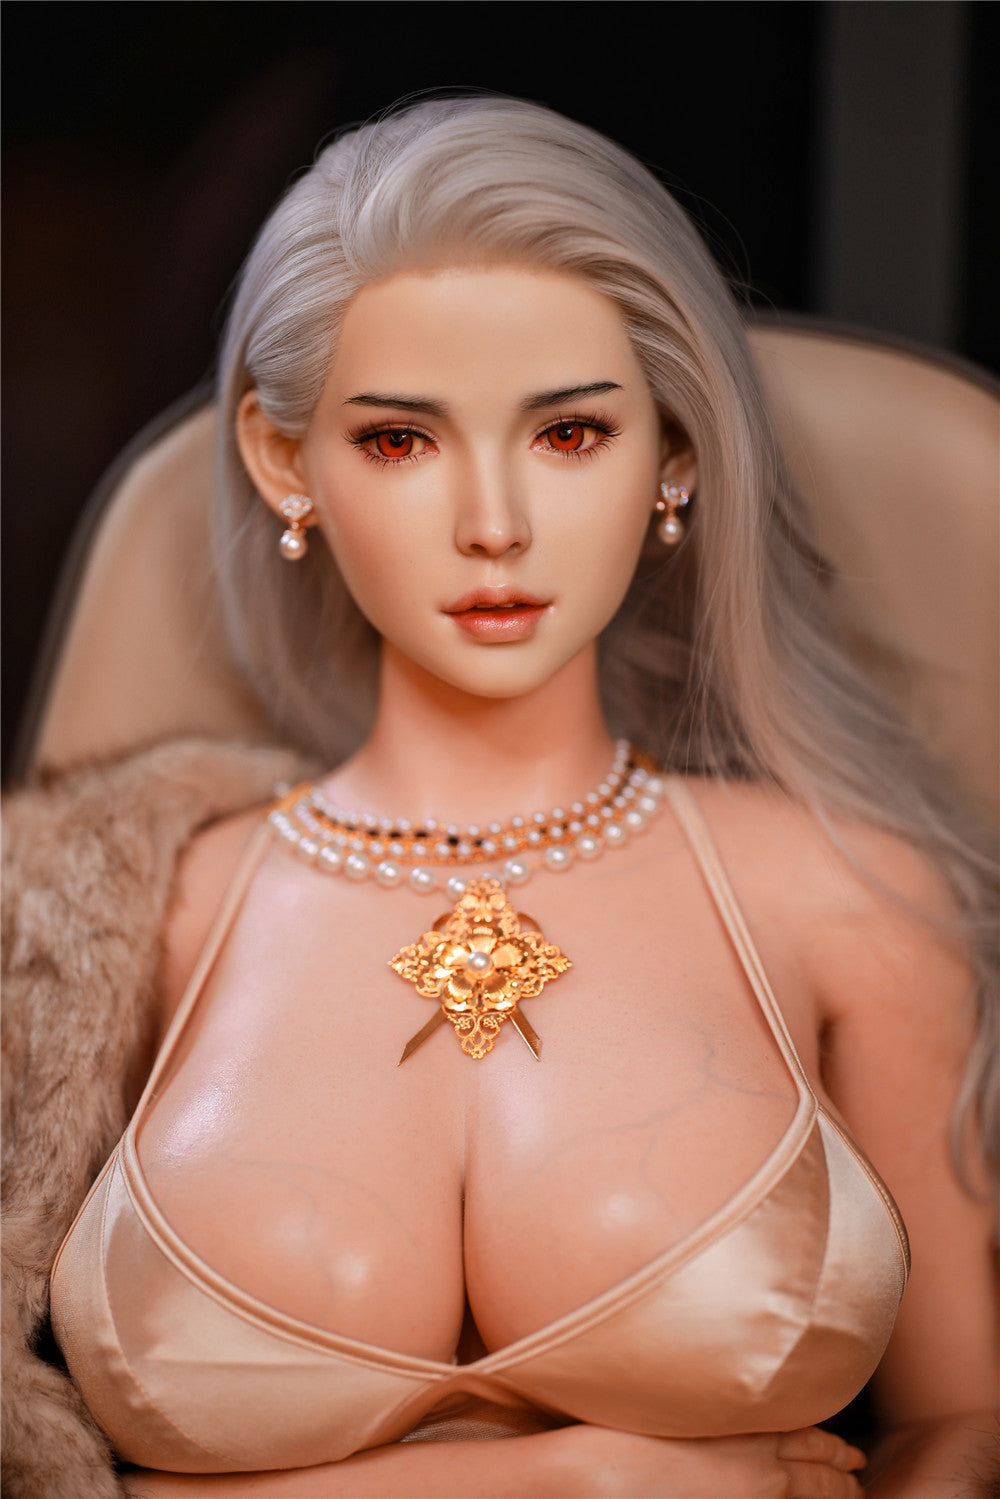 JY Doll 162 cm Silicone - Nancy | Buy Sex Dolls at DOLLS ACTUALLY